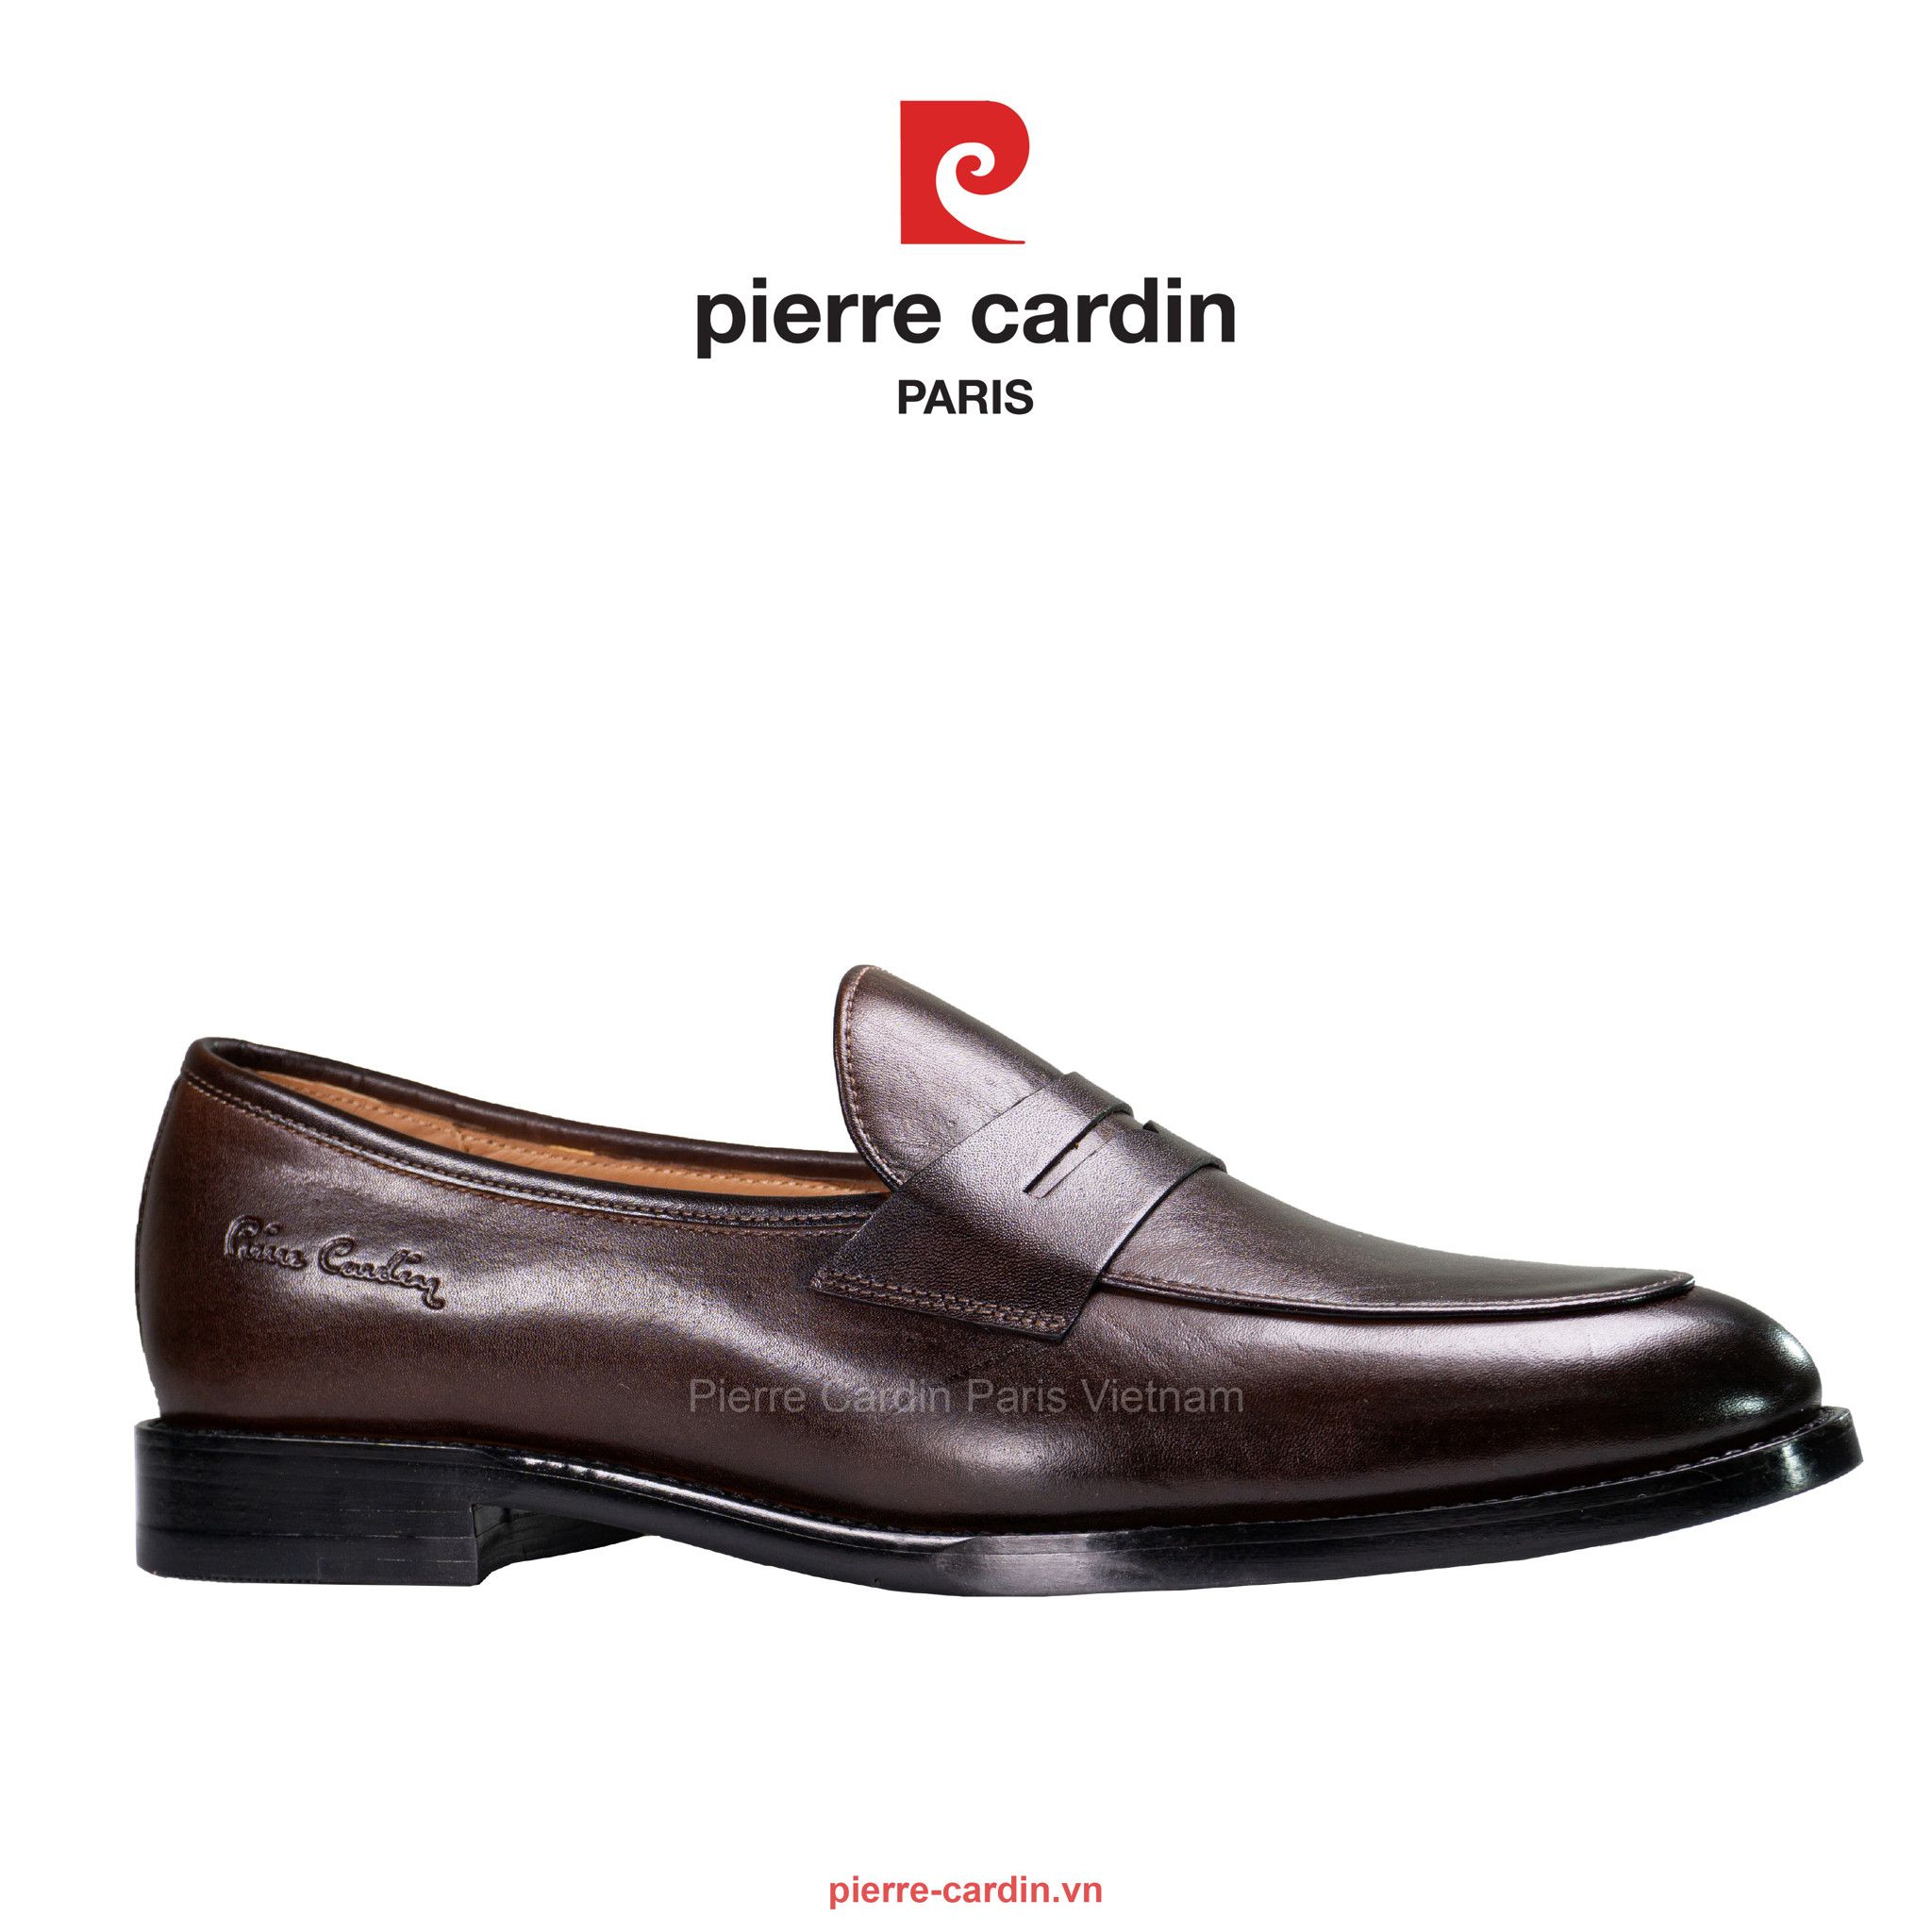 pierre-cardin.vn/products/giay-horsebit-loafer-cao-cap-phong-cach-hoang-gia-pierre-cardin-pcmfwlg358